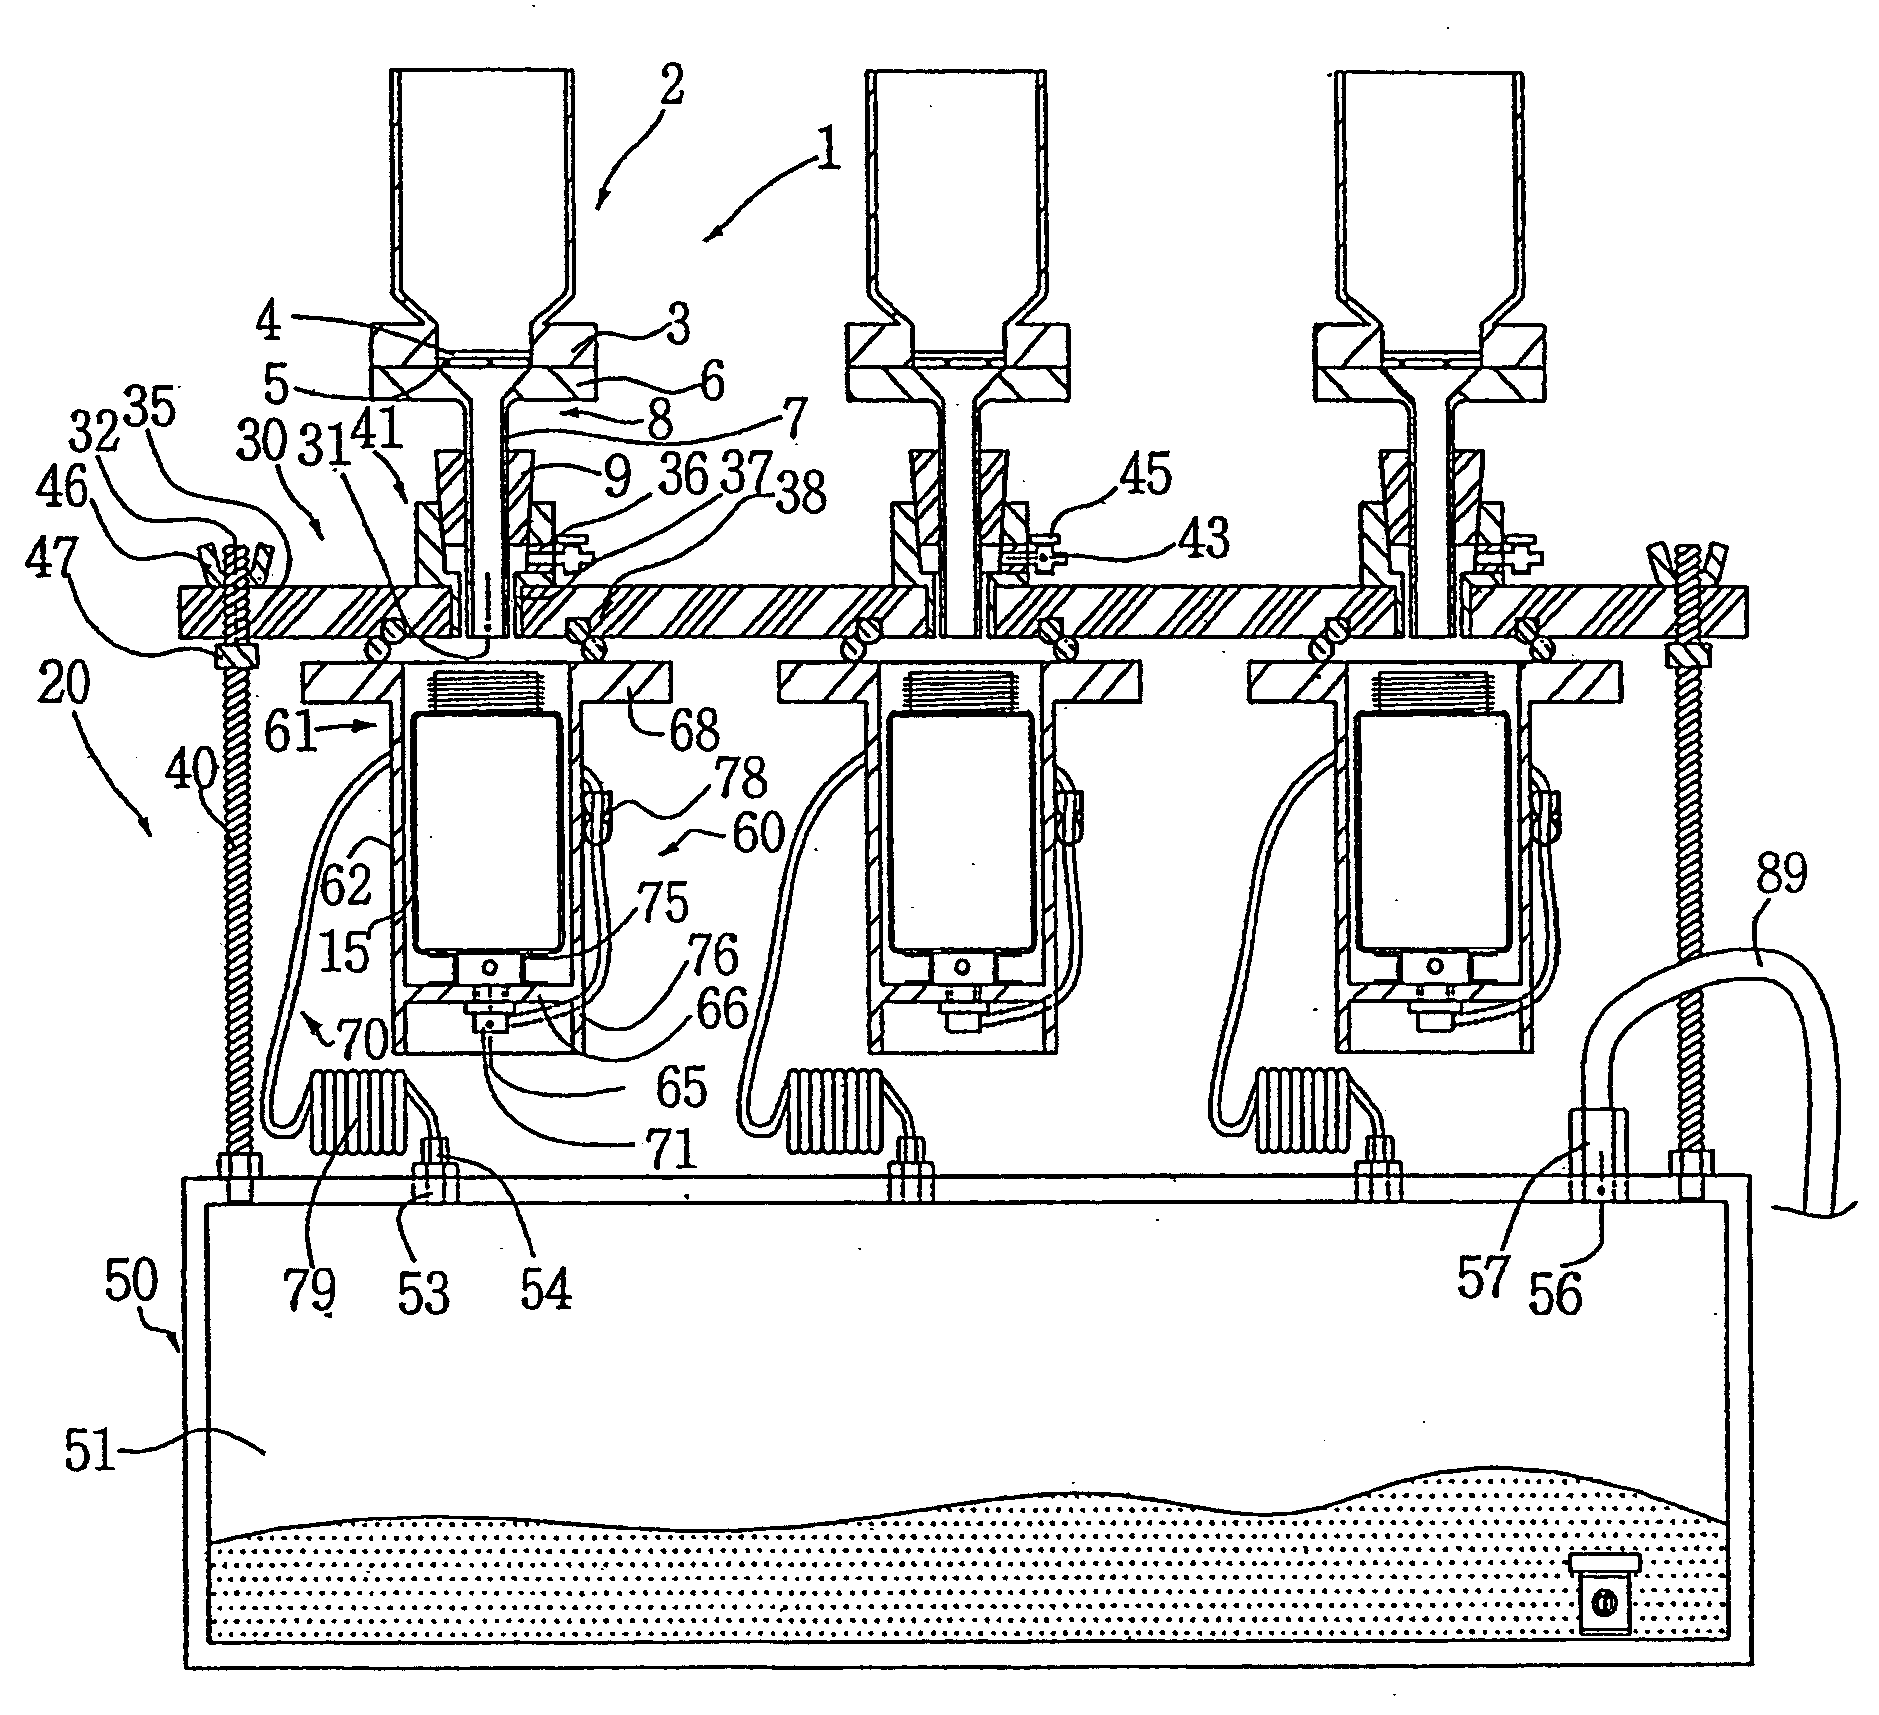 Device for simultaneously collecting filtered water and filter paper